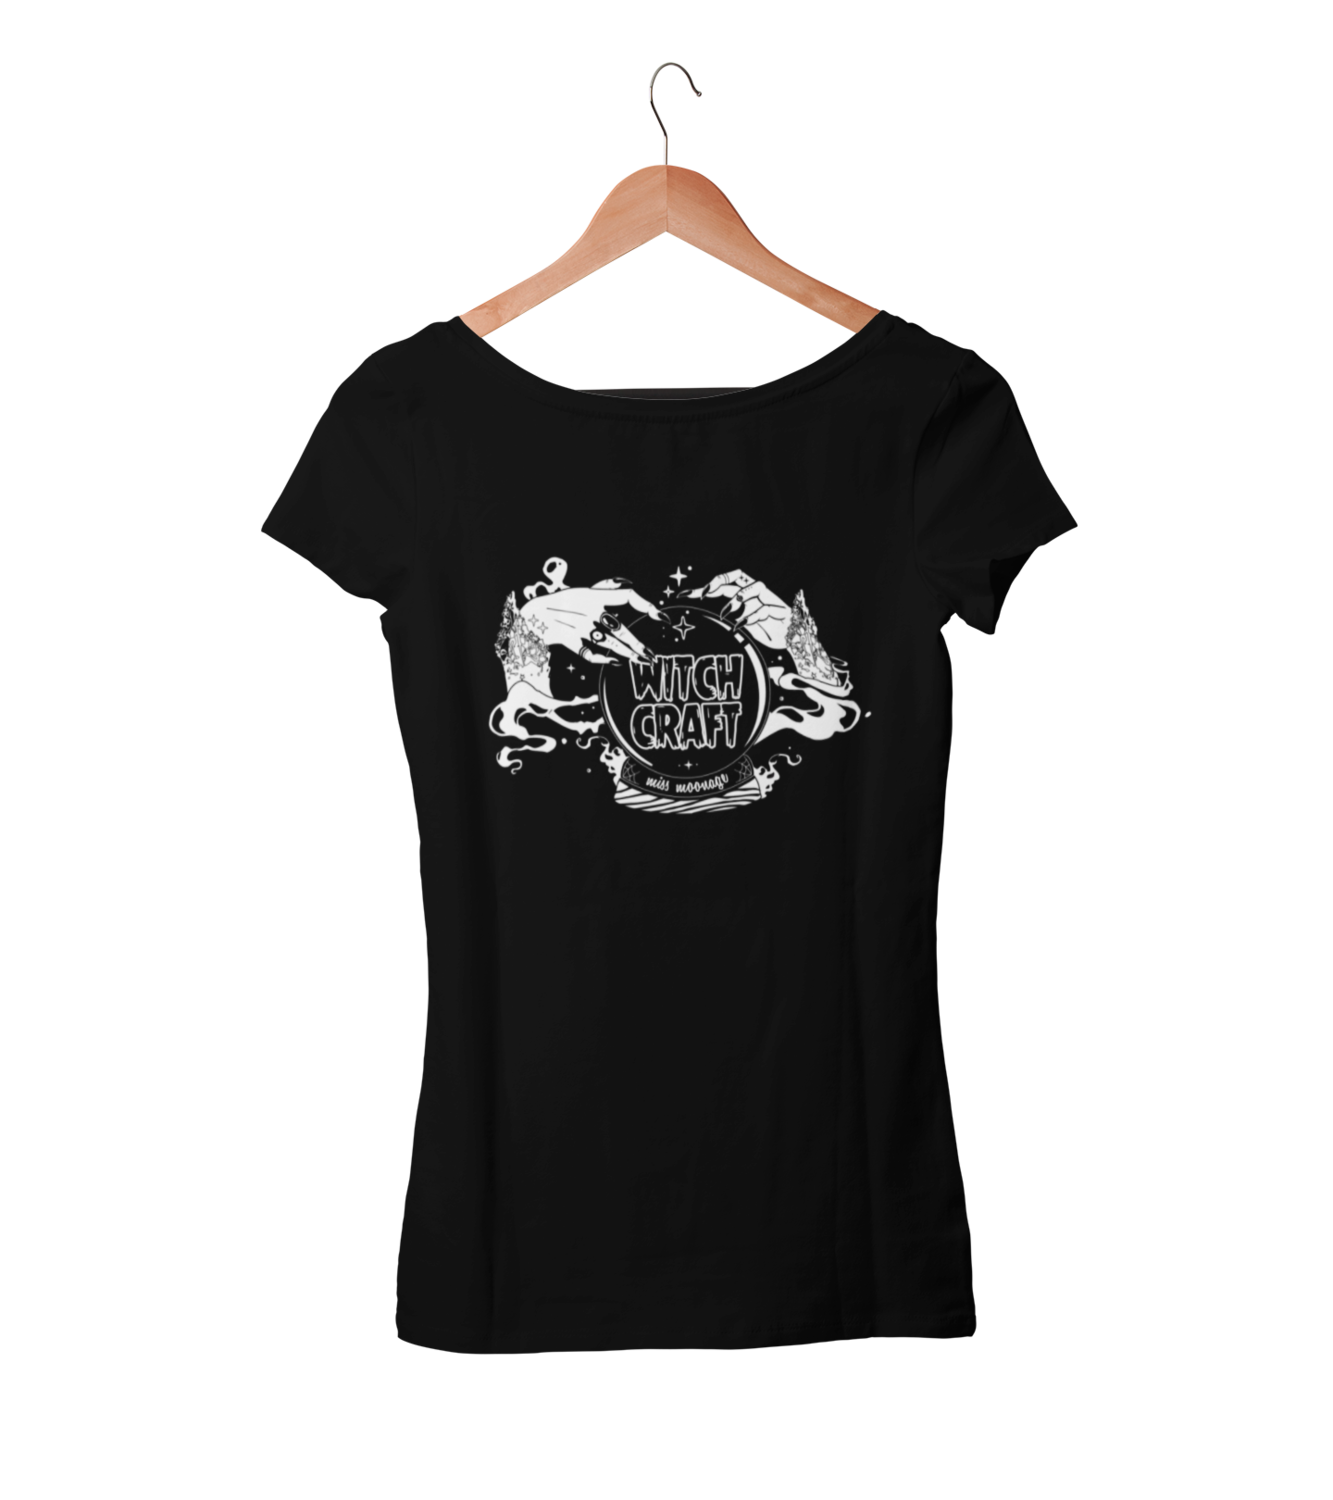 WITCH CRAFT by MISS MOONAGE tshirt for WOMEN